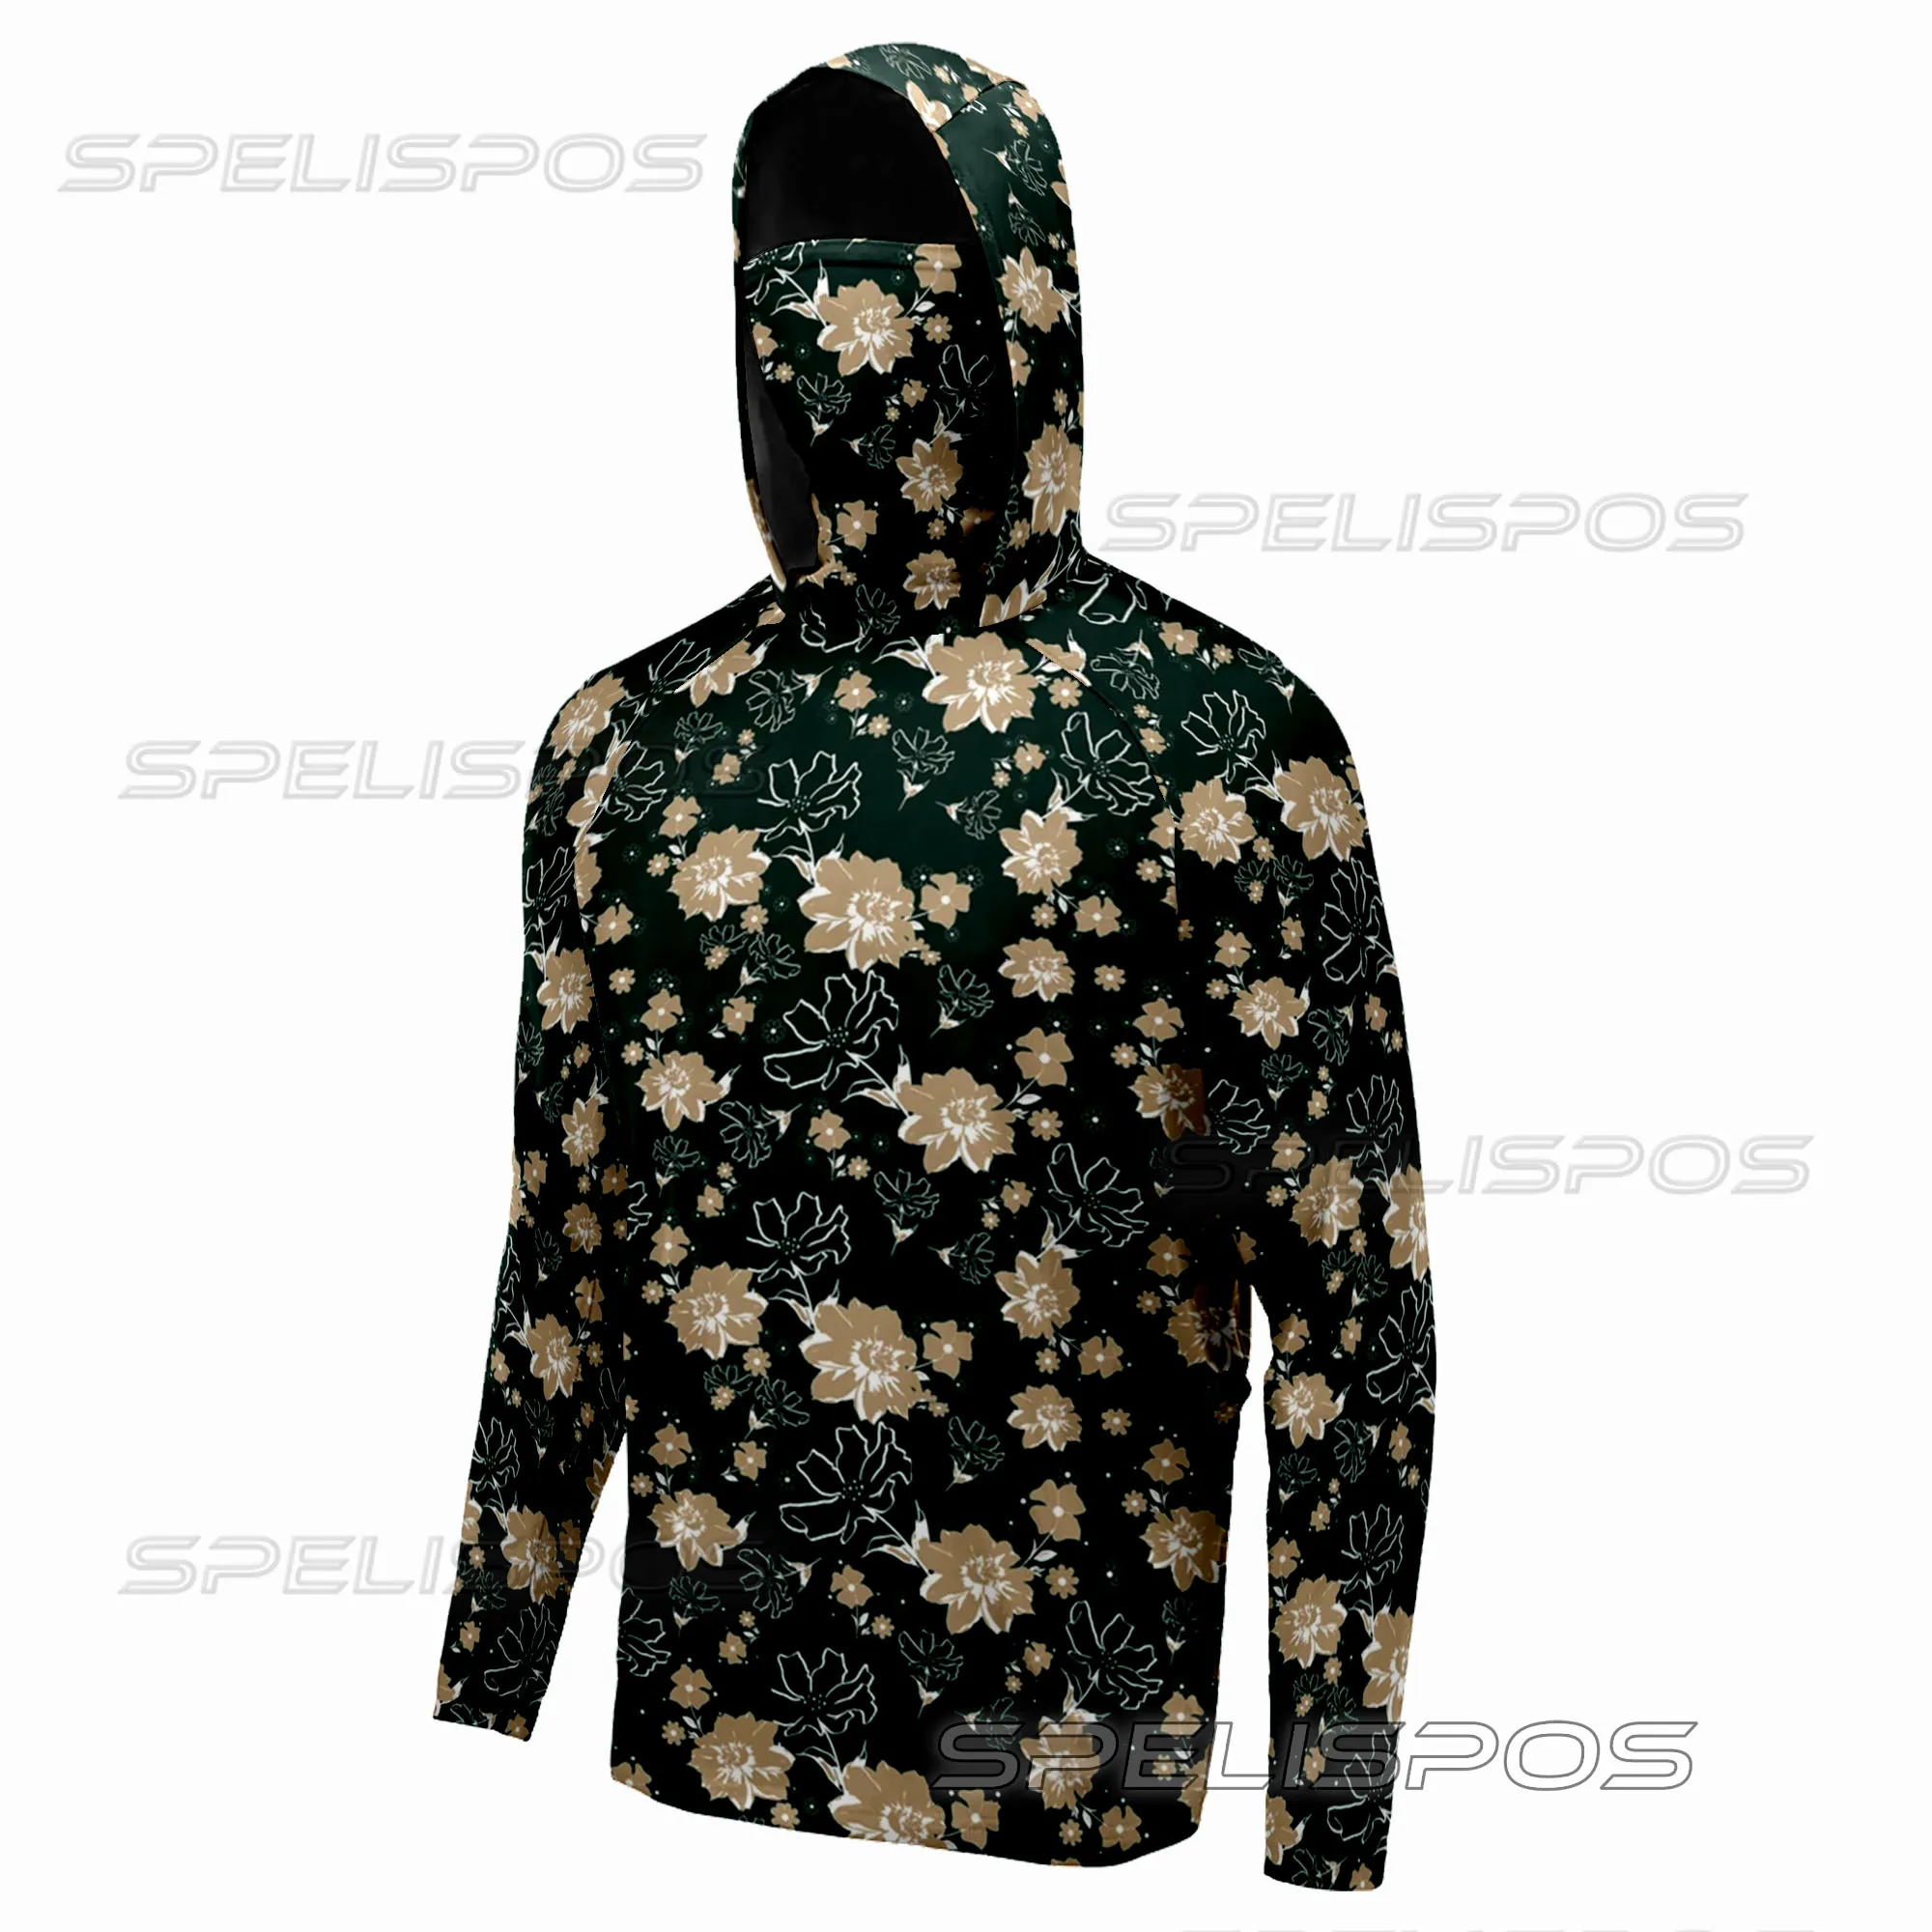 

SPELISPOS Summer Fishing Mask Hoodie Men Long Sleeve Clothes Breathable Fishing Jersey Sun Protection Camouflage Outdoor Shirts